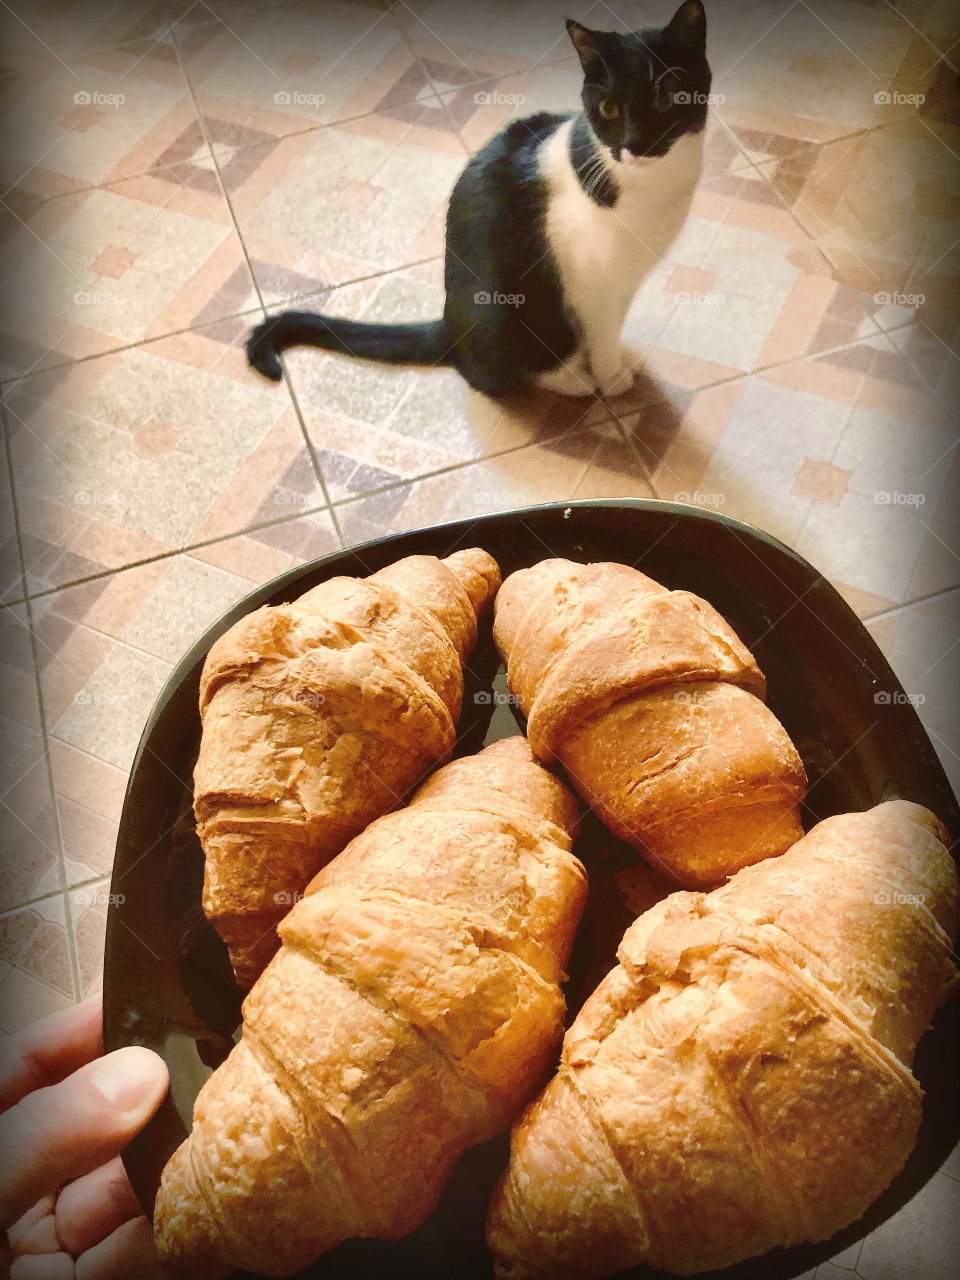 Would you mind some hot fresh croissants, soft cat? 🥐 